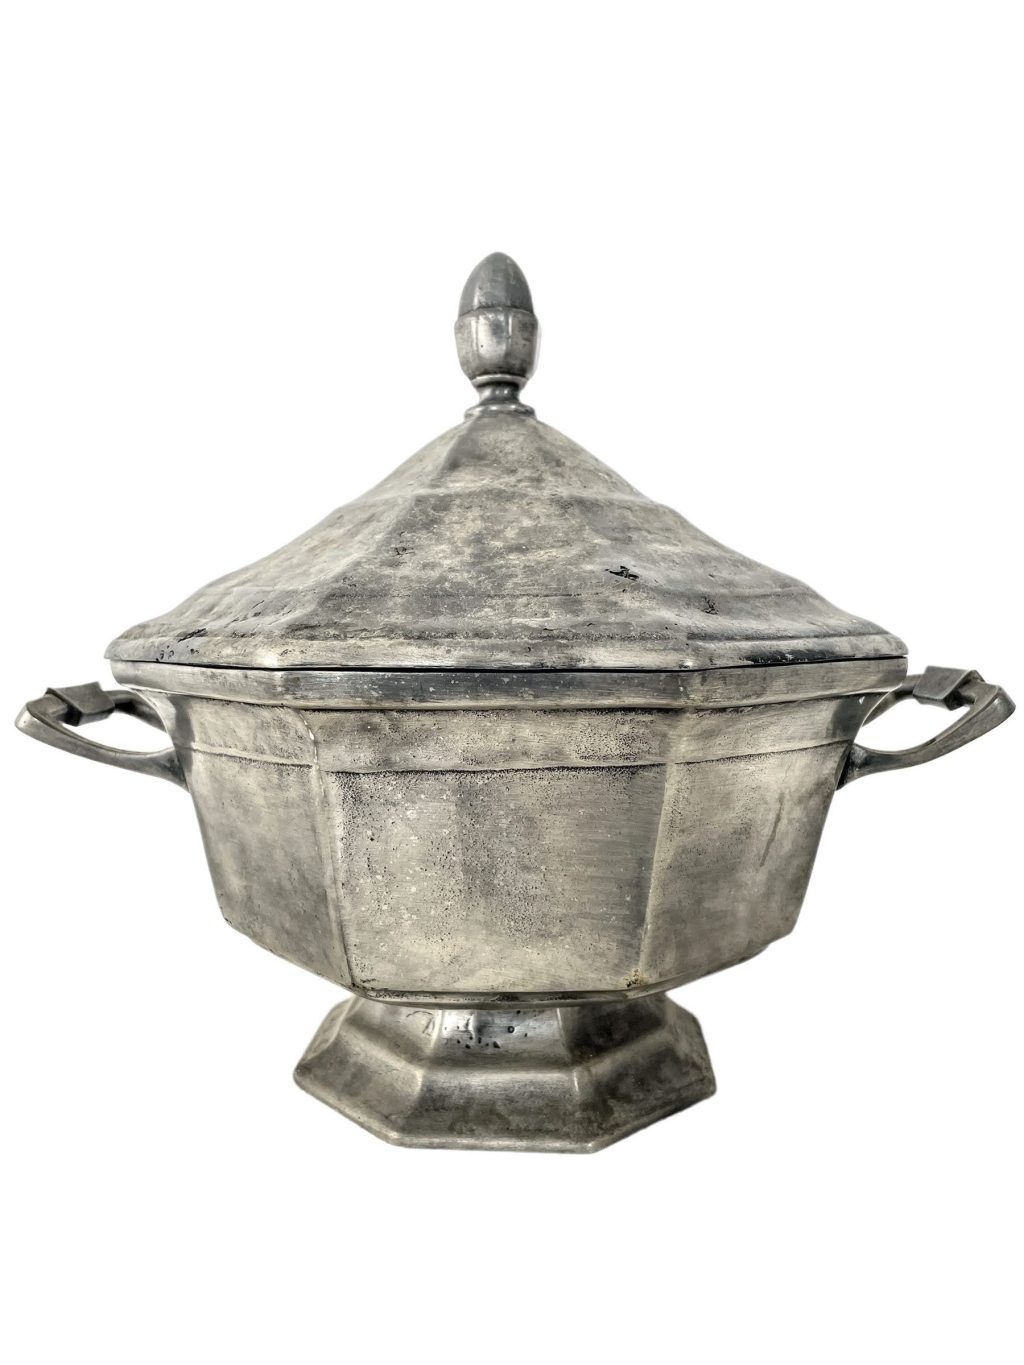 Antique French Paris Pewter Lidded Tureen Bowl Dish Metal Serving Decorative Table Dining Food Display Lid circa 1900’s